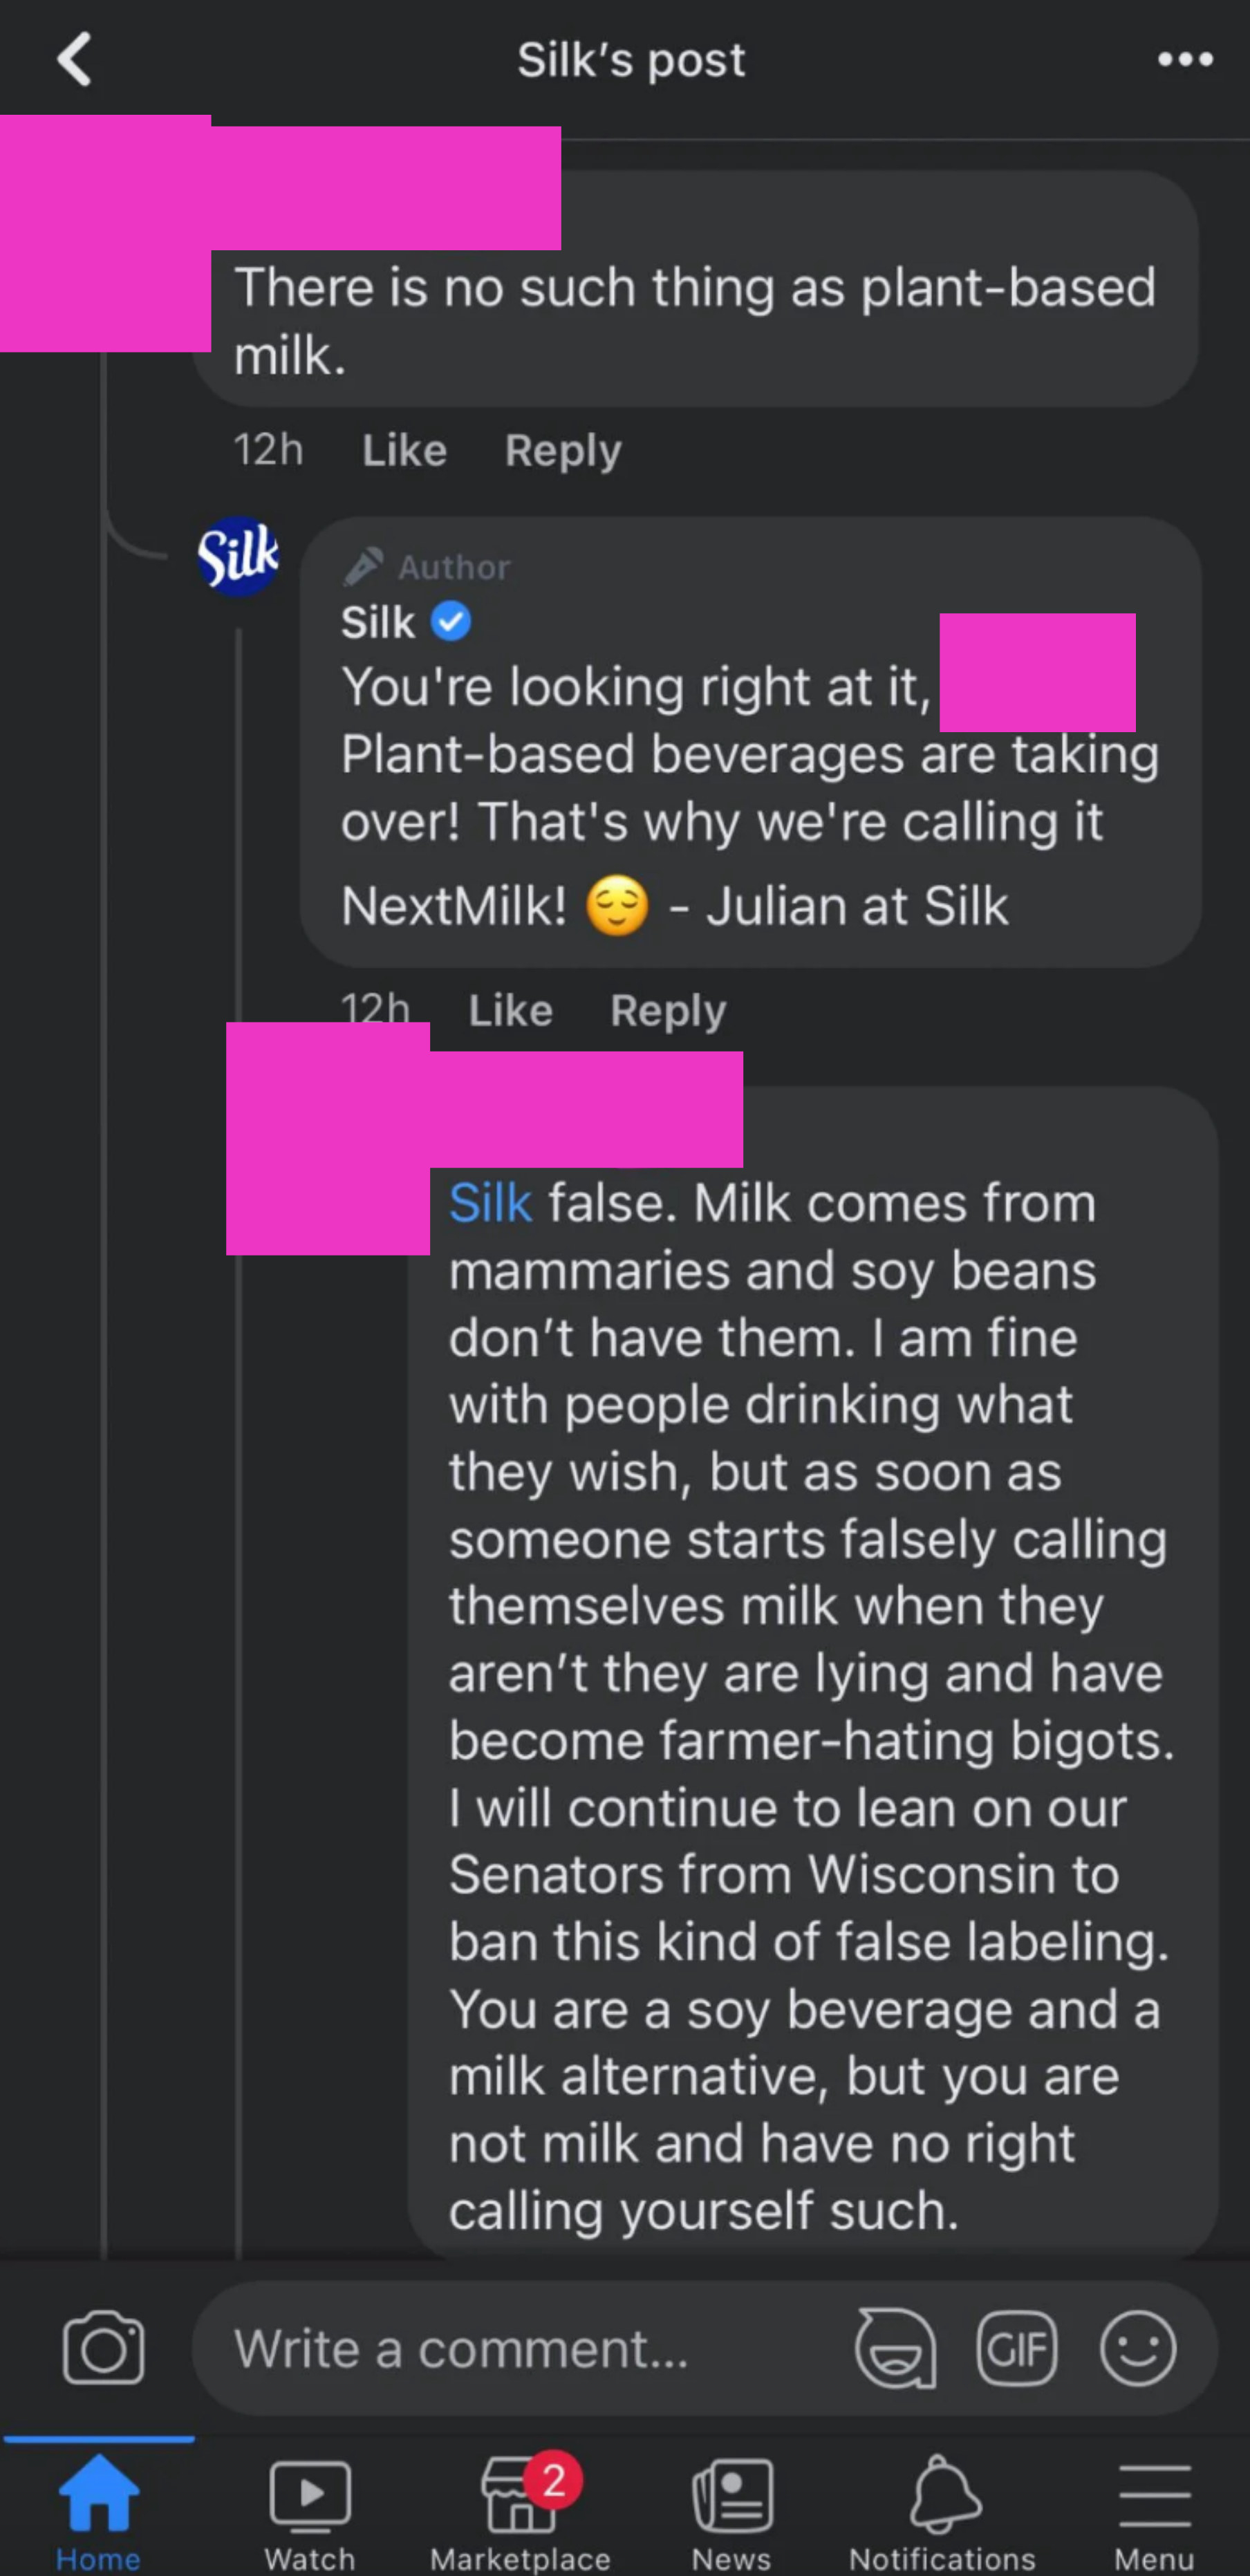 Person argues with Silk milk rep that &quot;milk comes from mammaries and soybeans don&#x27;t have them,&quot; and anyone who calls it milk when it isn&#x27;t is a &quot;farmer-hating bigot,&quot; and they&#x27;ll lean on their senators from Wisconsin to &quot;ban this kind of false labeling&quot;